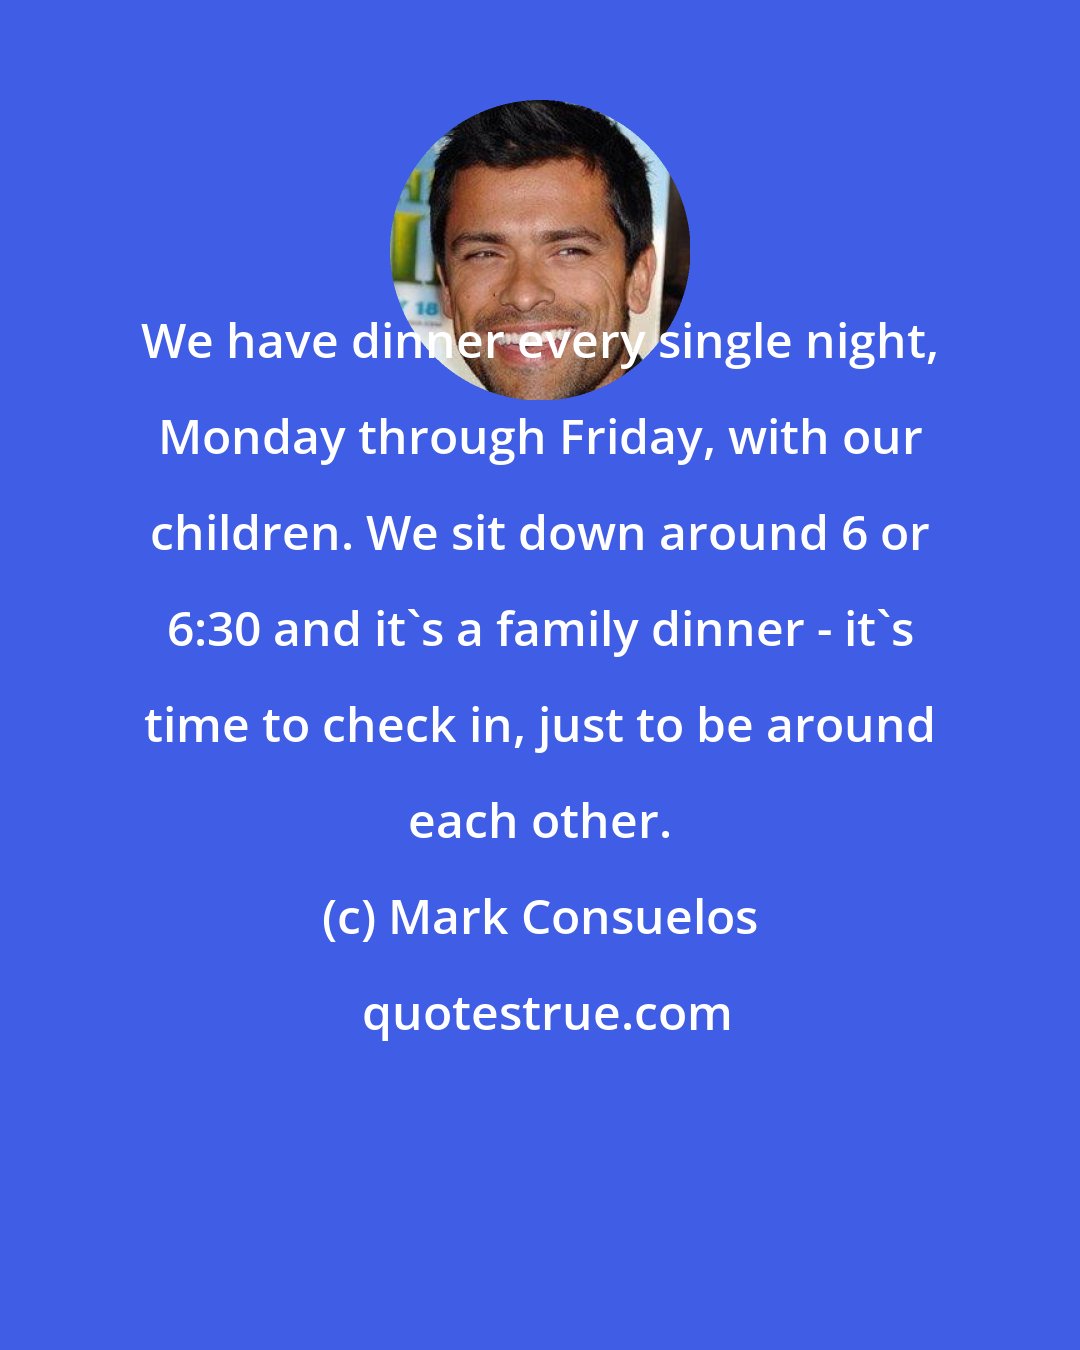 Mark Consuelos: We have dinner every single night, Monday through Friday, with our children. We sit down around 6 or 6:30 and it's a family dinner - it's time to check in, just to be around each other.